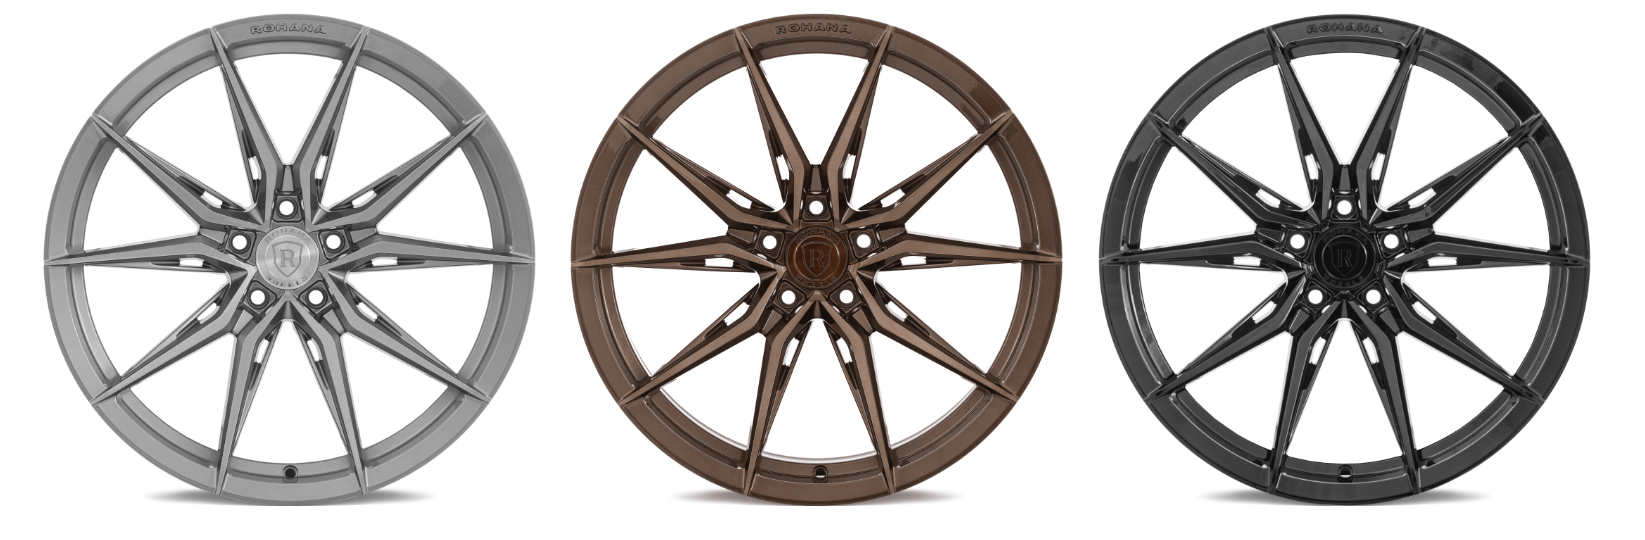 S650 Mustang Rohana Wheels RFX Series - Cross Forged & Max Concave Design - Vibe Motorsports 8.PNG